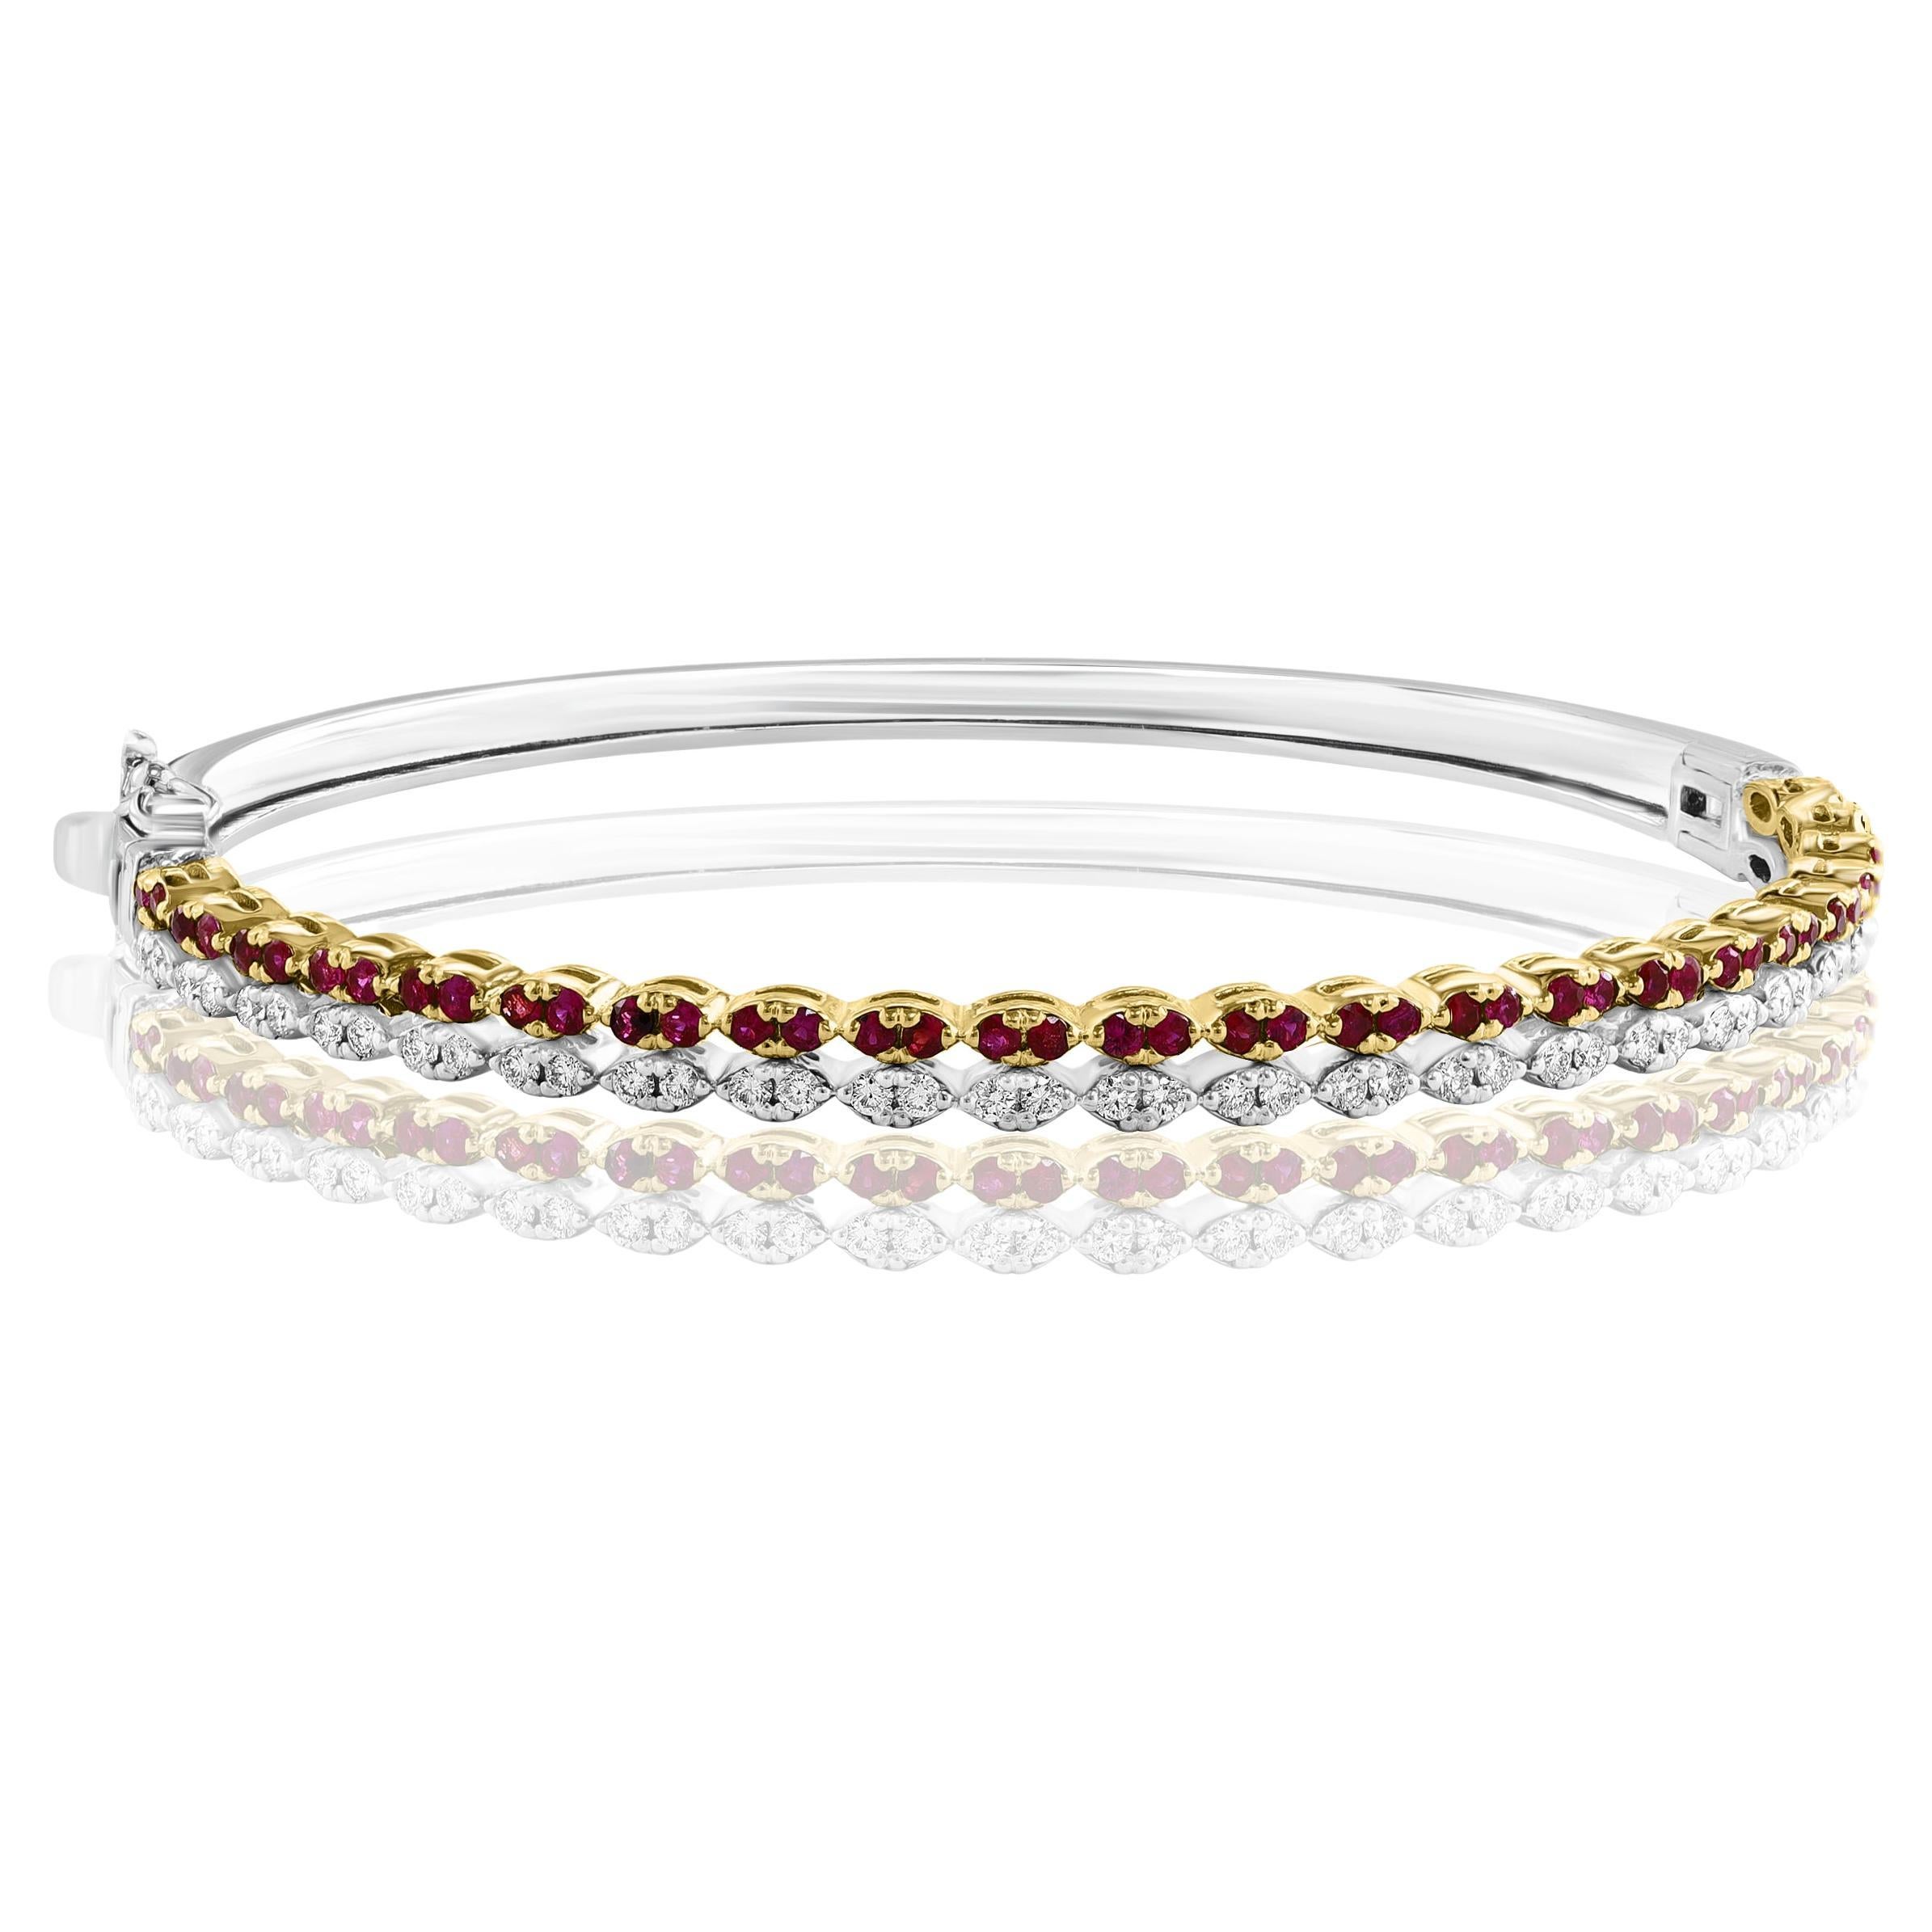 0.89 Carat Brilliant Cut Ruby and Diamond Bangle in 14K Mix Gold